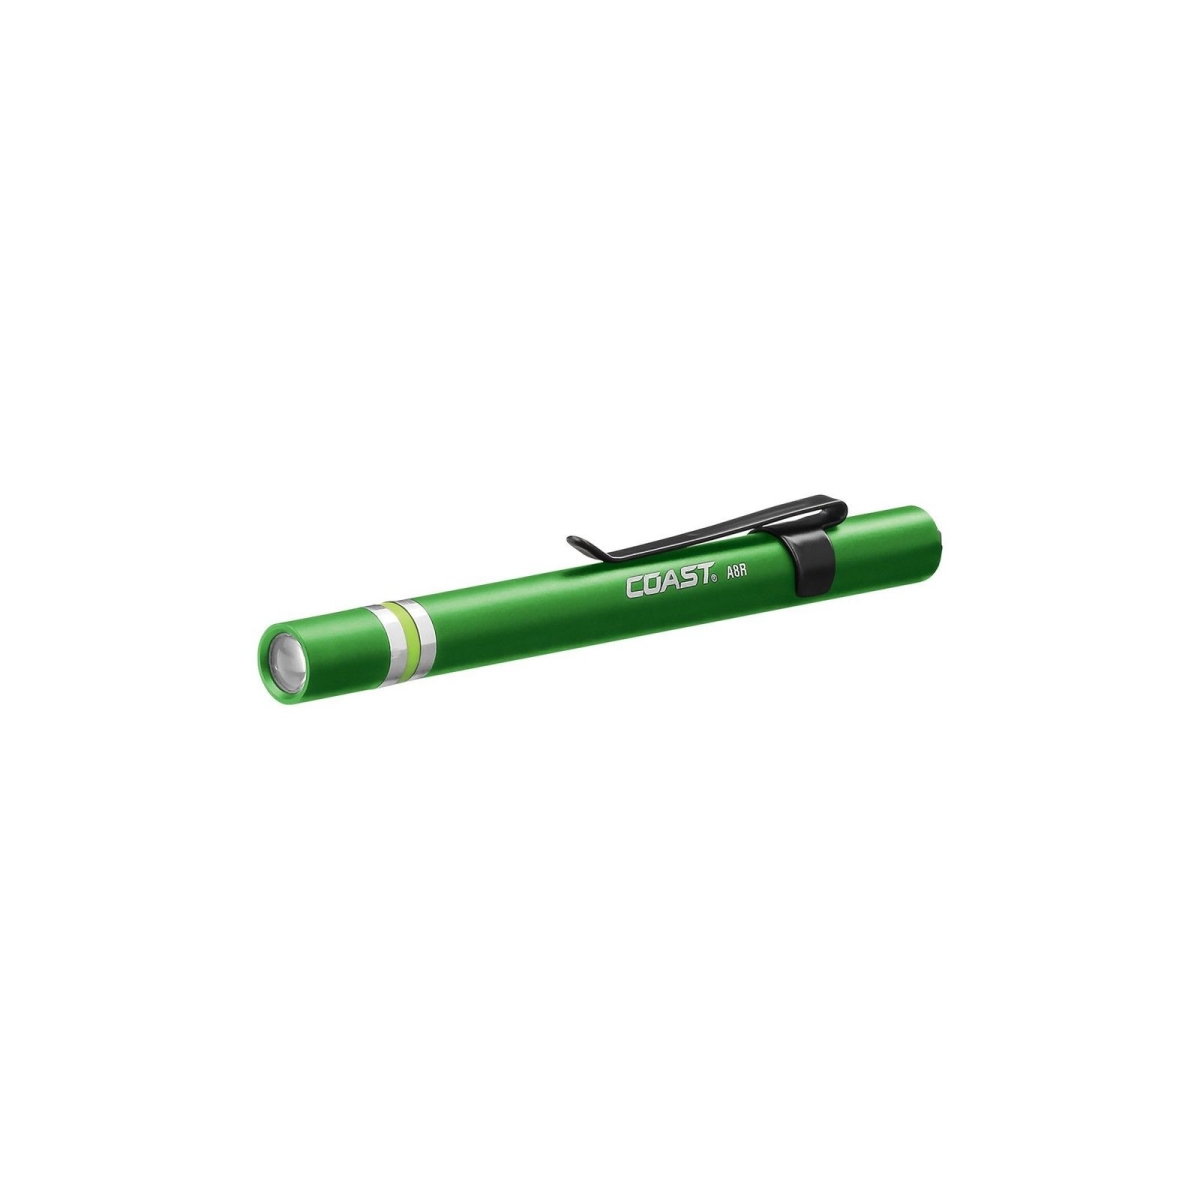 Cst-21515 Rechargeable Inspection Penlight, Green